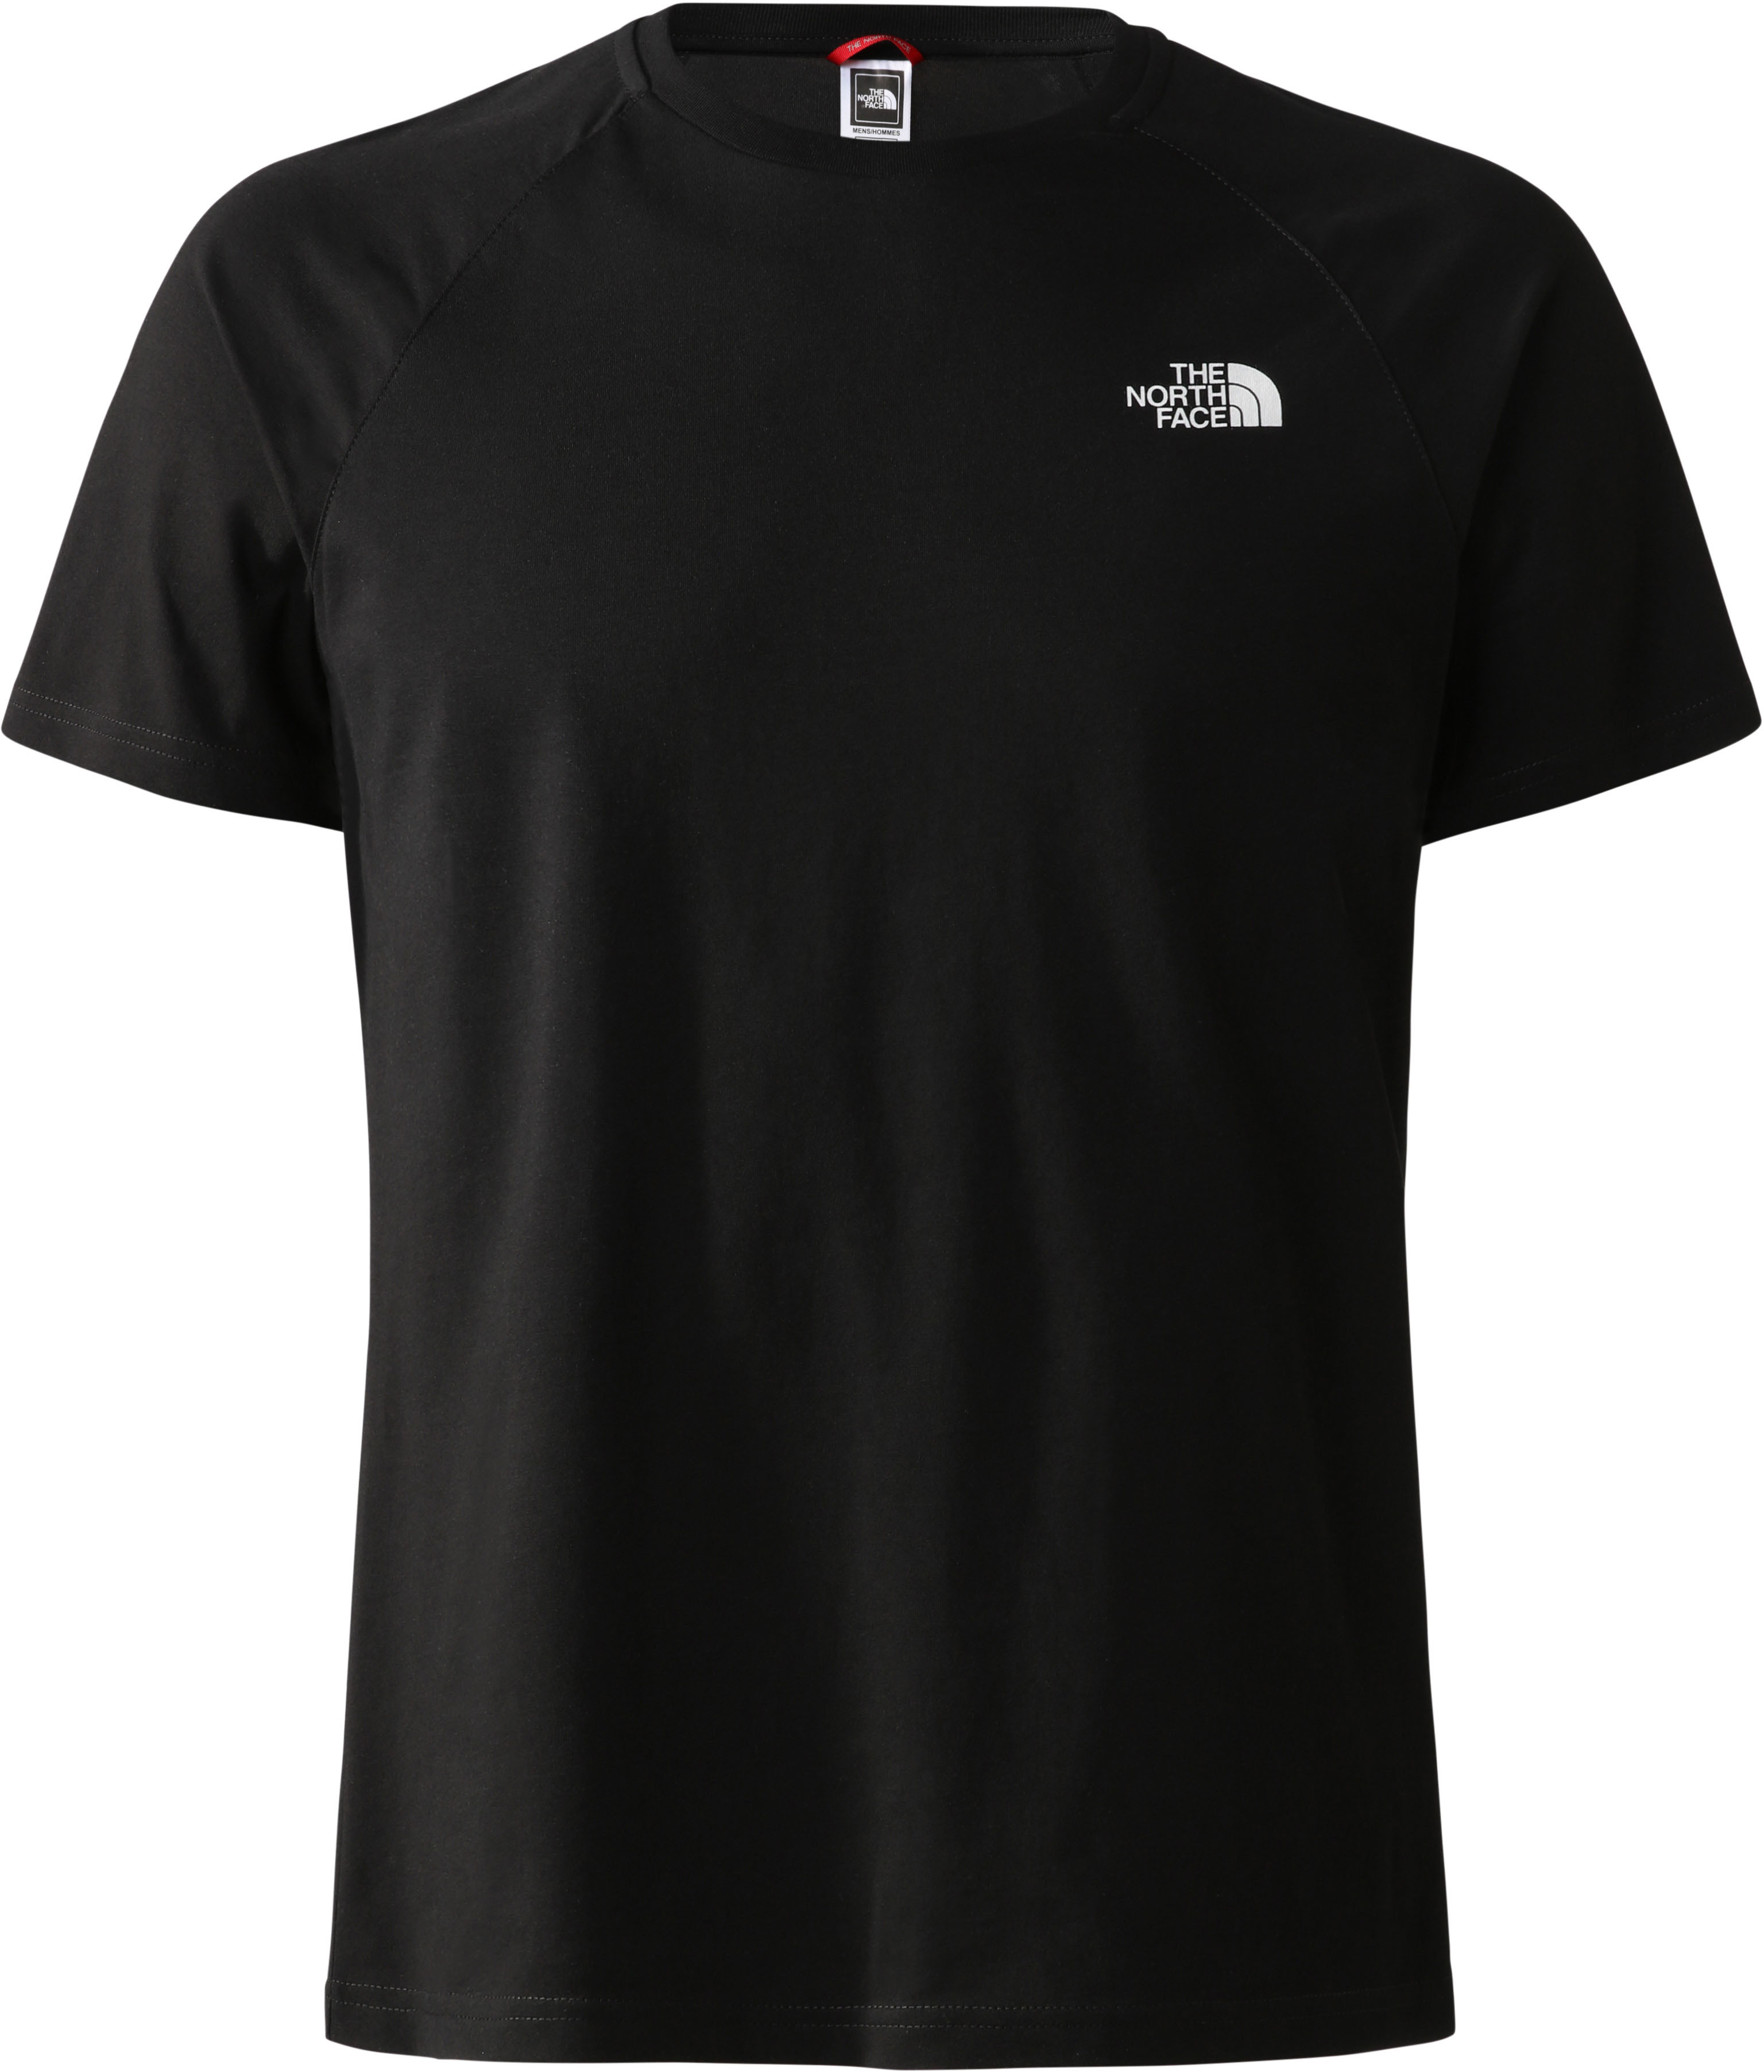 The North Face M S/S North Faces Tee S